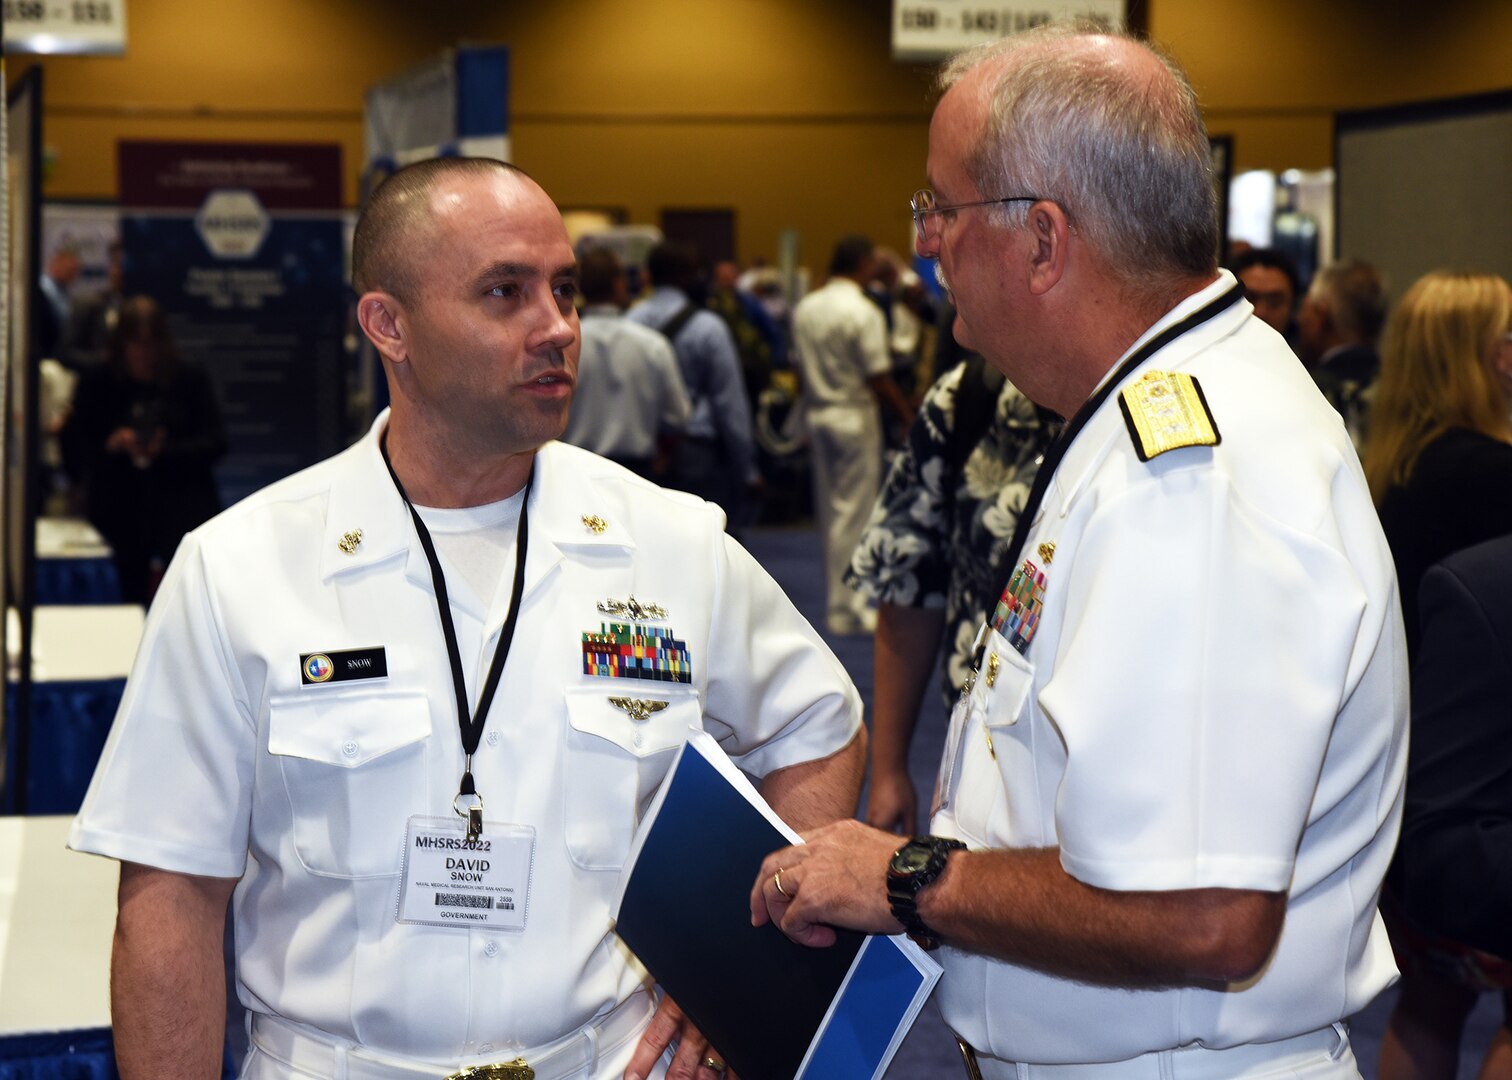 KISSIMMEE, Fla. – (Sept. 13, 2022) – Senior Chief Hospital Corpsman David Snow, of Mountain Top, Pa., senior enlisted leader assigned to Naval Medical Research Unit (NAMRU) San Antonio, speaks with the Surgeon General of the Navy, Rear. Adm. Bruce L. Gillingham during a poster session held on day two of the 2022 Military Health System Research Symposium (MHSRS) held at the Gaylord Palms Resort and Convention Center. The 2022 MHSRS brings together military, government, academia, and industry experts for four days of critical conversations and intensive idea sharing. Presenters will share their latest research findings and challenges on topics including combat casualty care, military operational medicine, clinical and rehabilitative medicine, medical simulation and information sciences, military infectious diseases, and the radiation health effects. NAMRU San Antonio is one of the leading research and development laboratories for the U.S. Navy under the Department of Defense and is one of eight subordinate research commands in the global network of laboratories operating under the Naval Medical Research Center in Silver Spring, Md.  Its mission is to conduct gap driven combat casualty care, craniofacial, and directed energy research to improve survival, operational readiness, and safety of DOD personnel engaged in routine and expeditionary operations. (U.S. Navy photo by Burrell Parmer, NAMRU San Antonio Public Affairs/Released)